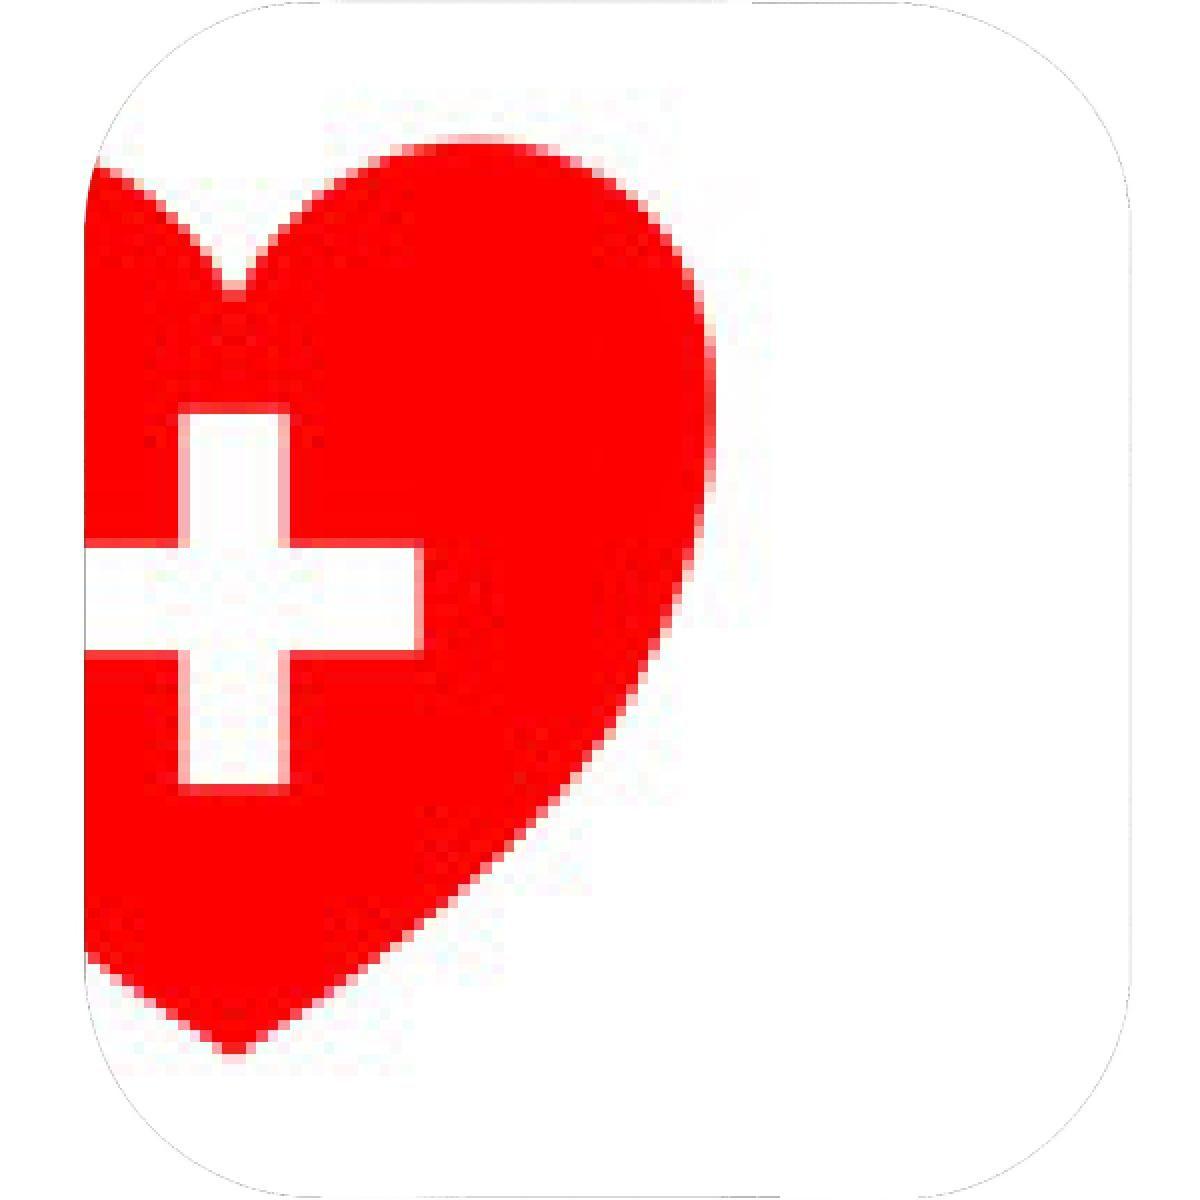 Red Heart with White Cross Logo - Designs